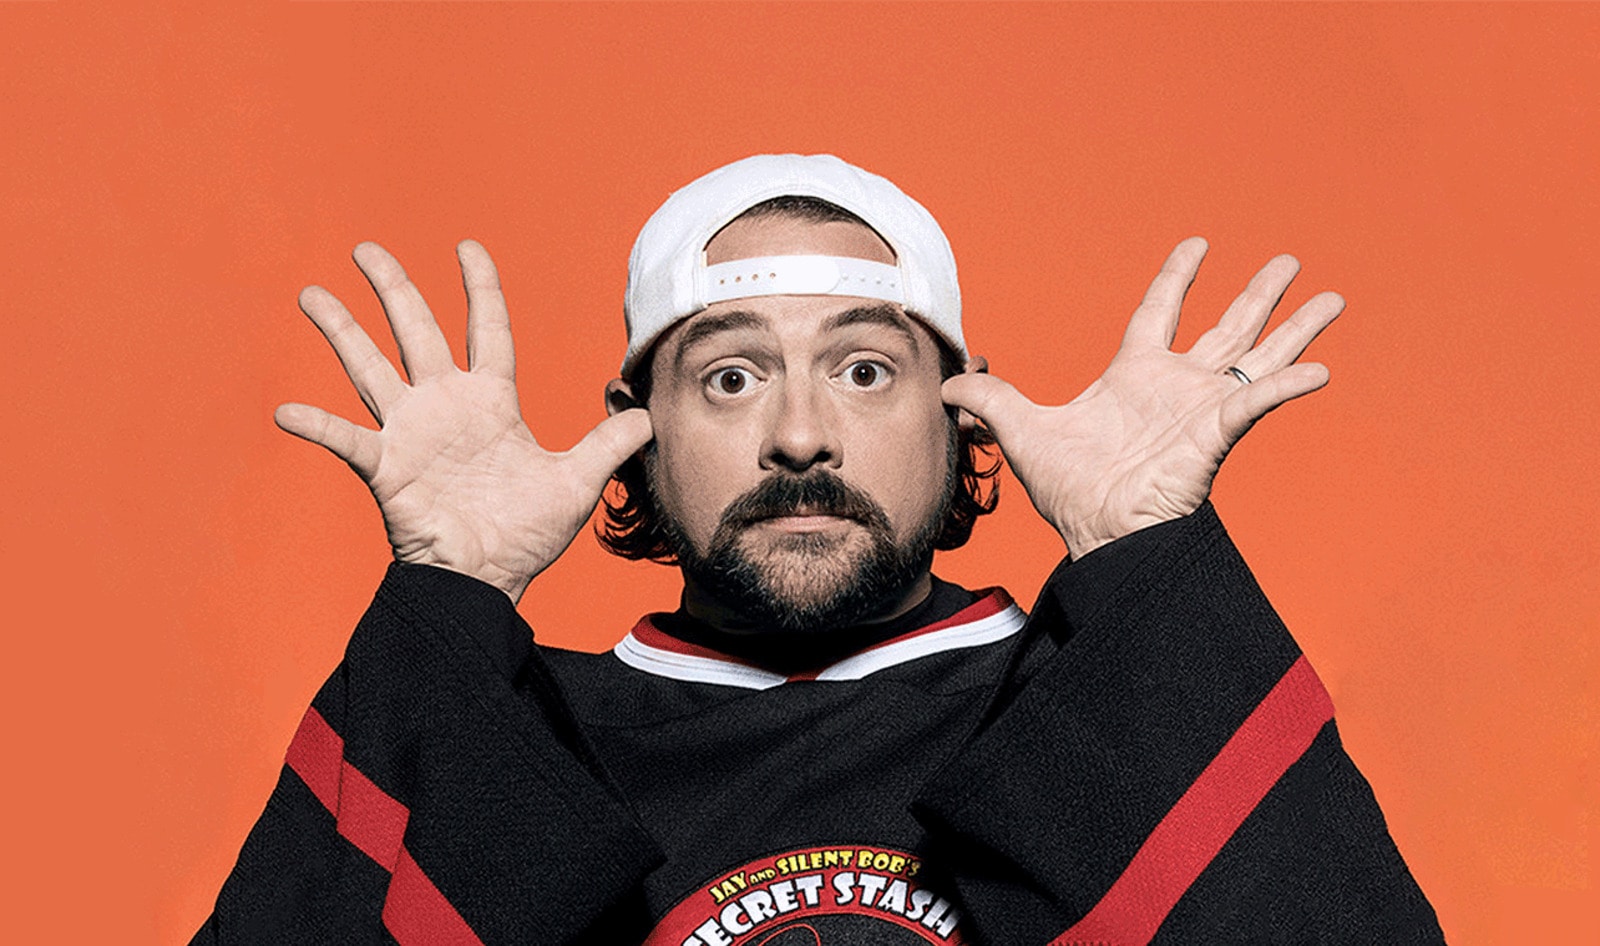 Kevin Smith Says Veganism Reconciles His Childhood Promise to Love Animals